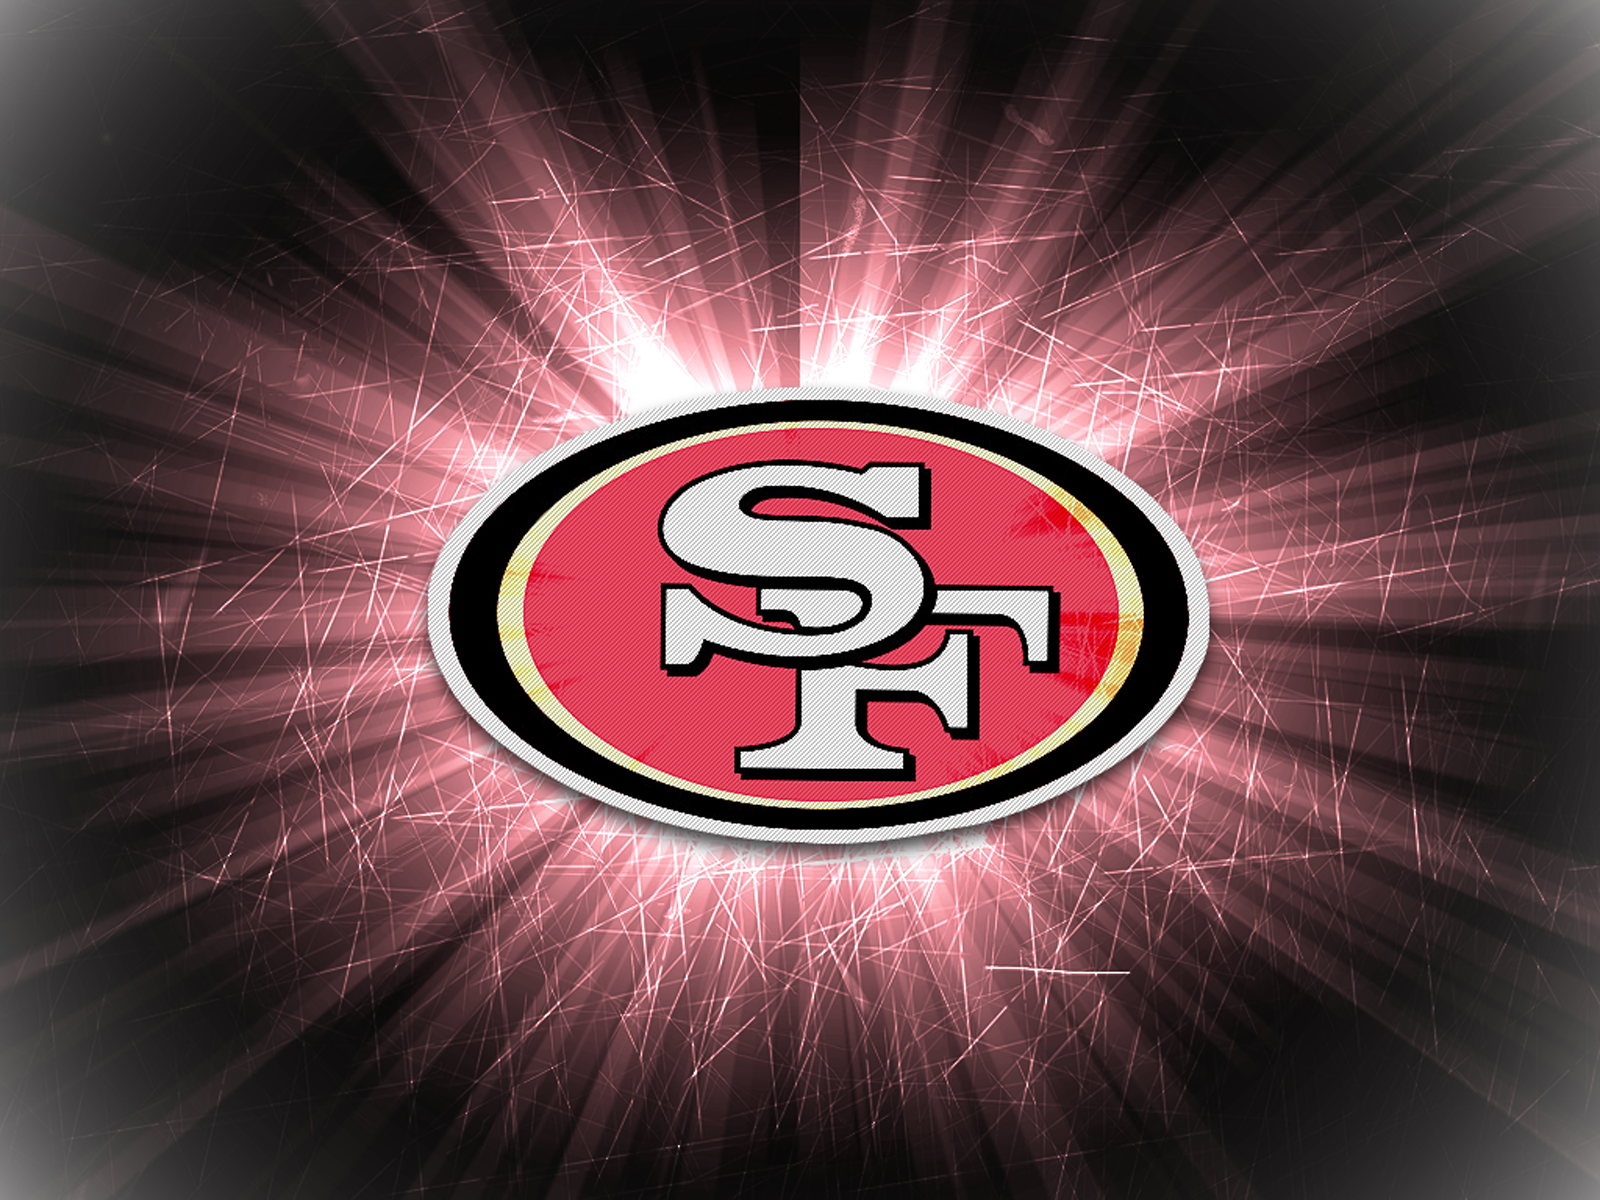 More San Francisco 49ers wallpapers